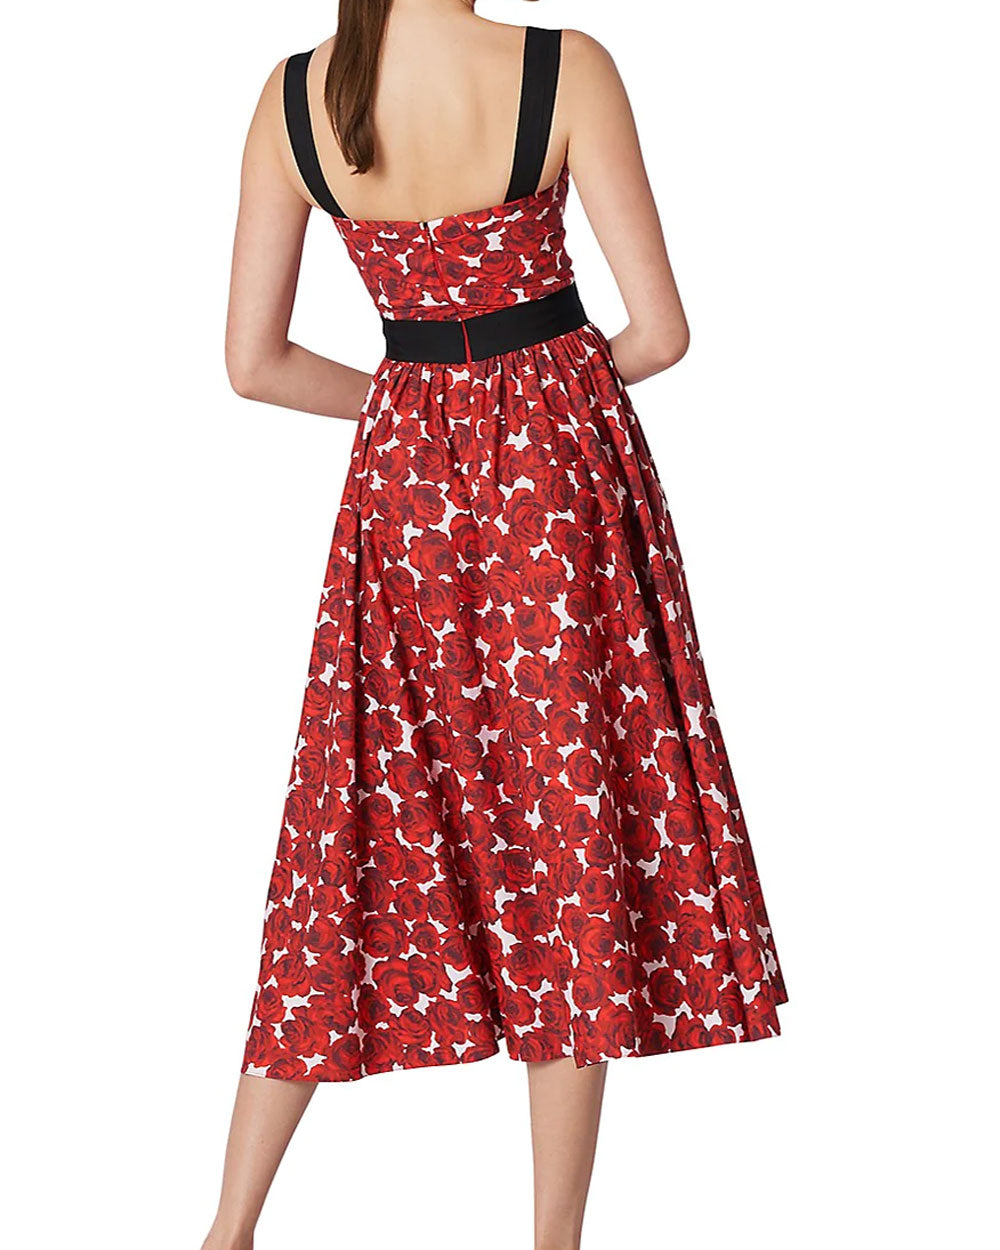 Red Floral Sweetheart A Line Midi Dress